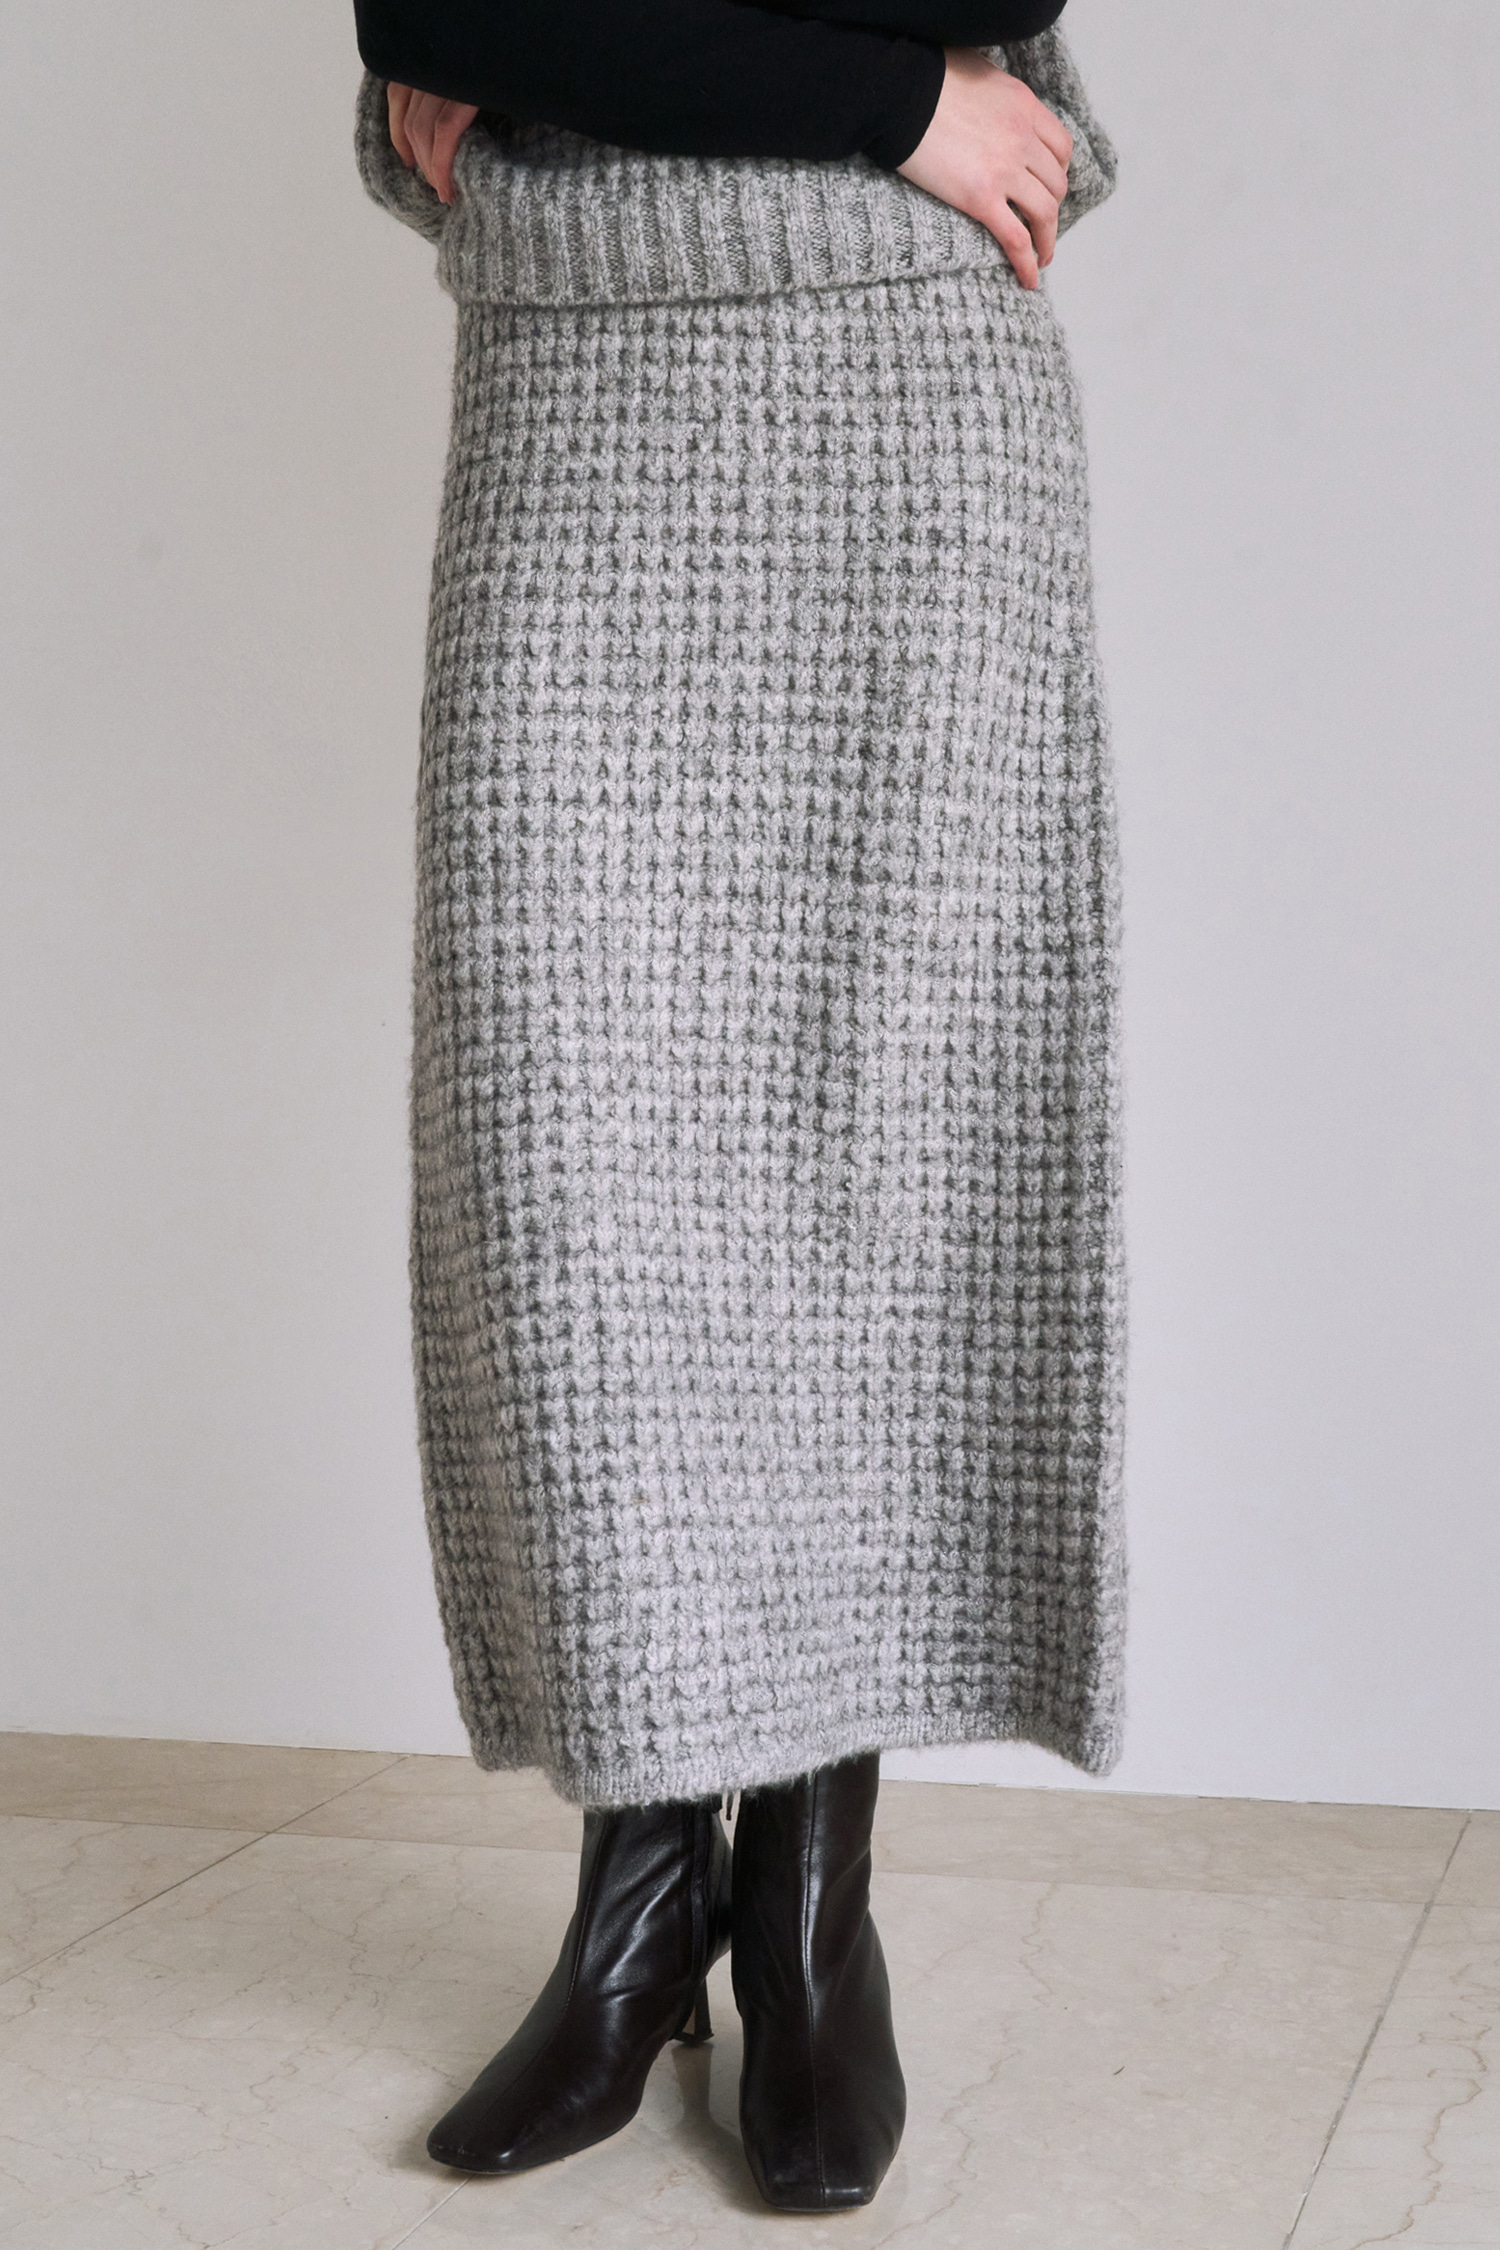 Square wale knit skirt - gray